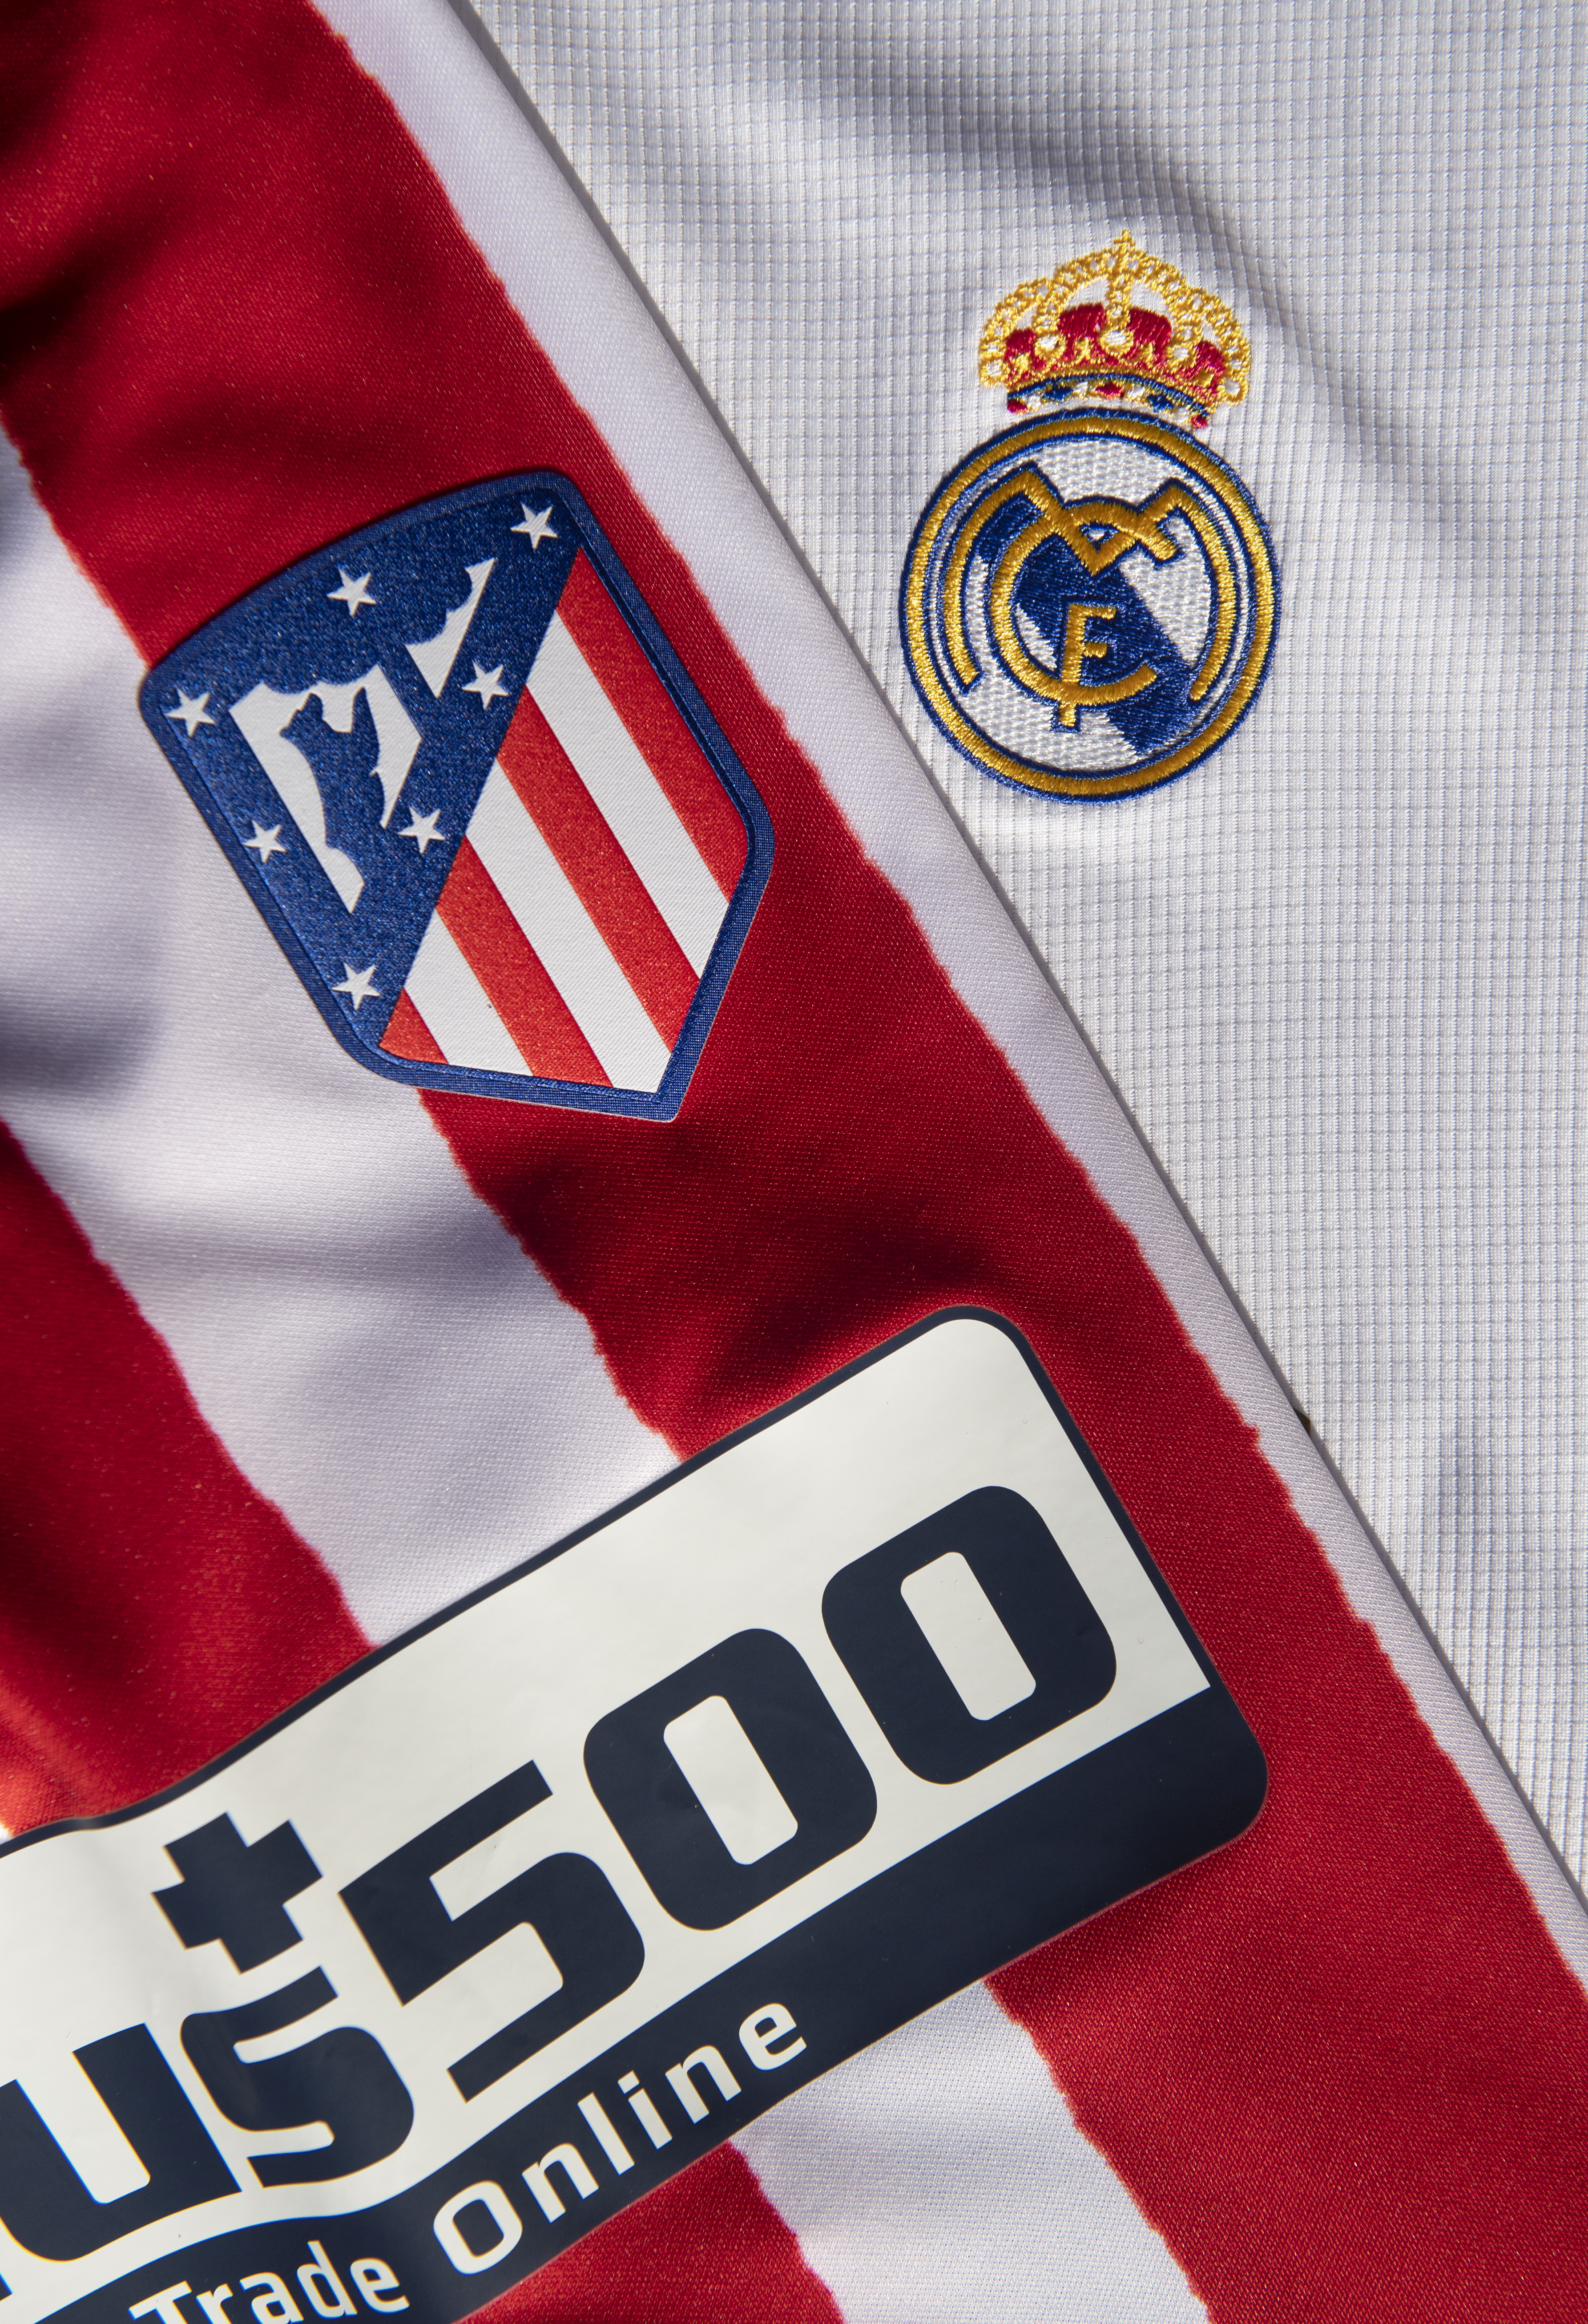 The Atletico Madrid and Real Madrid Badges